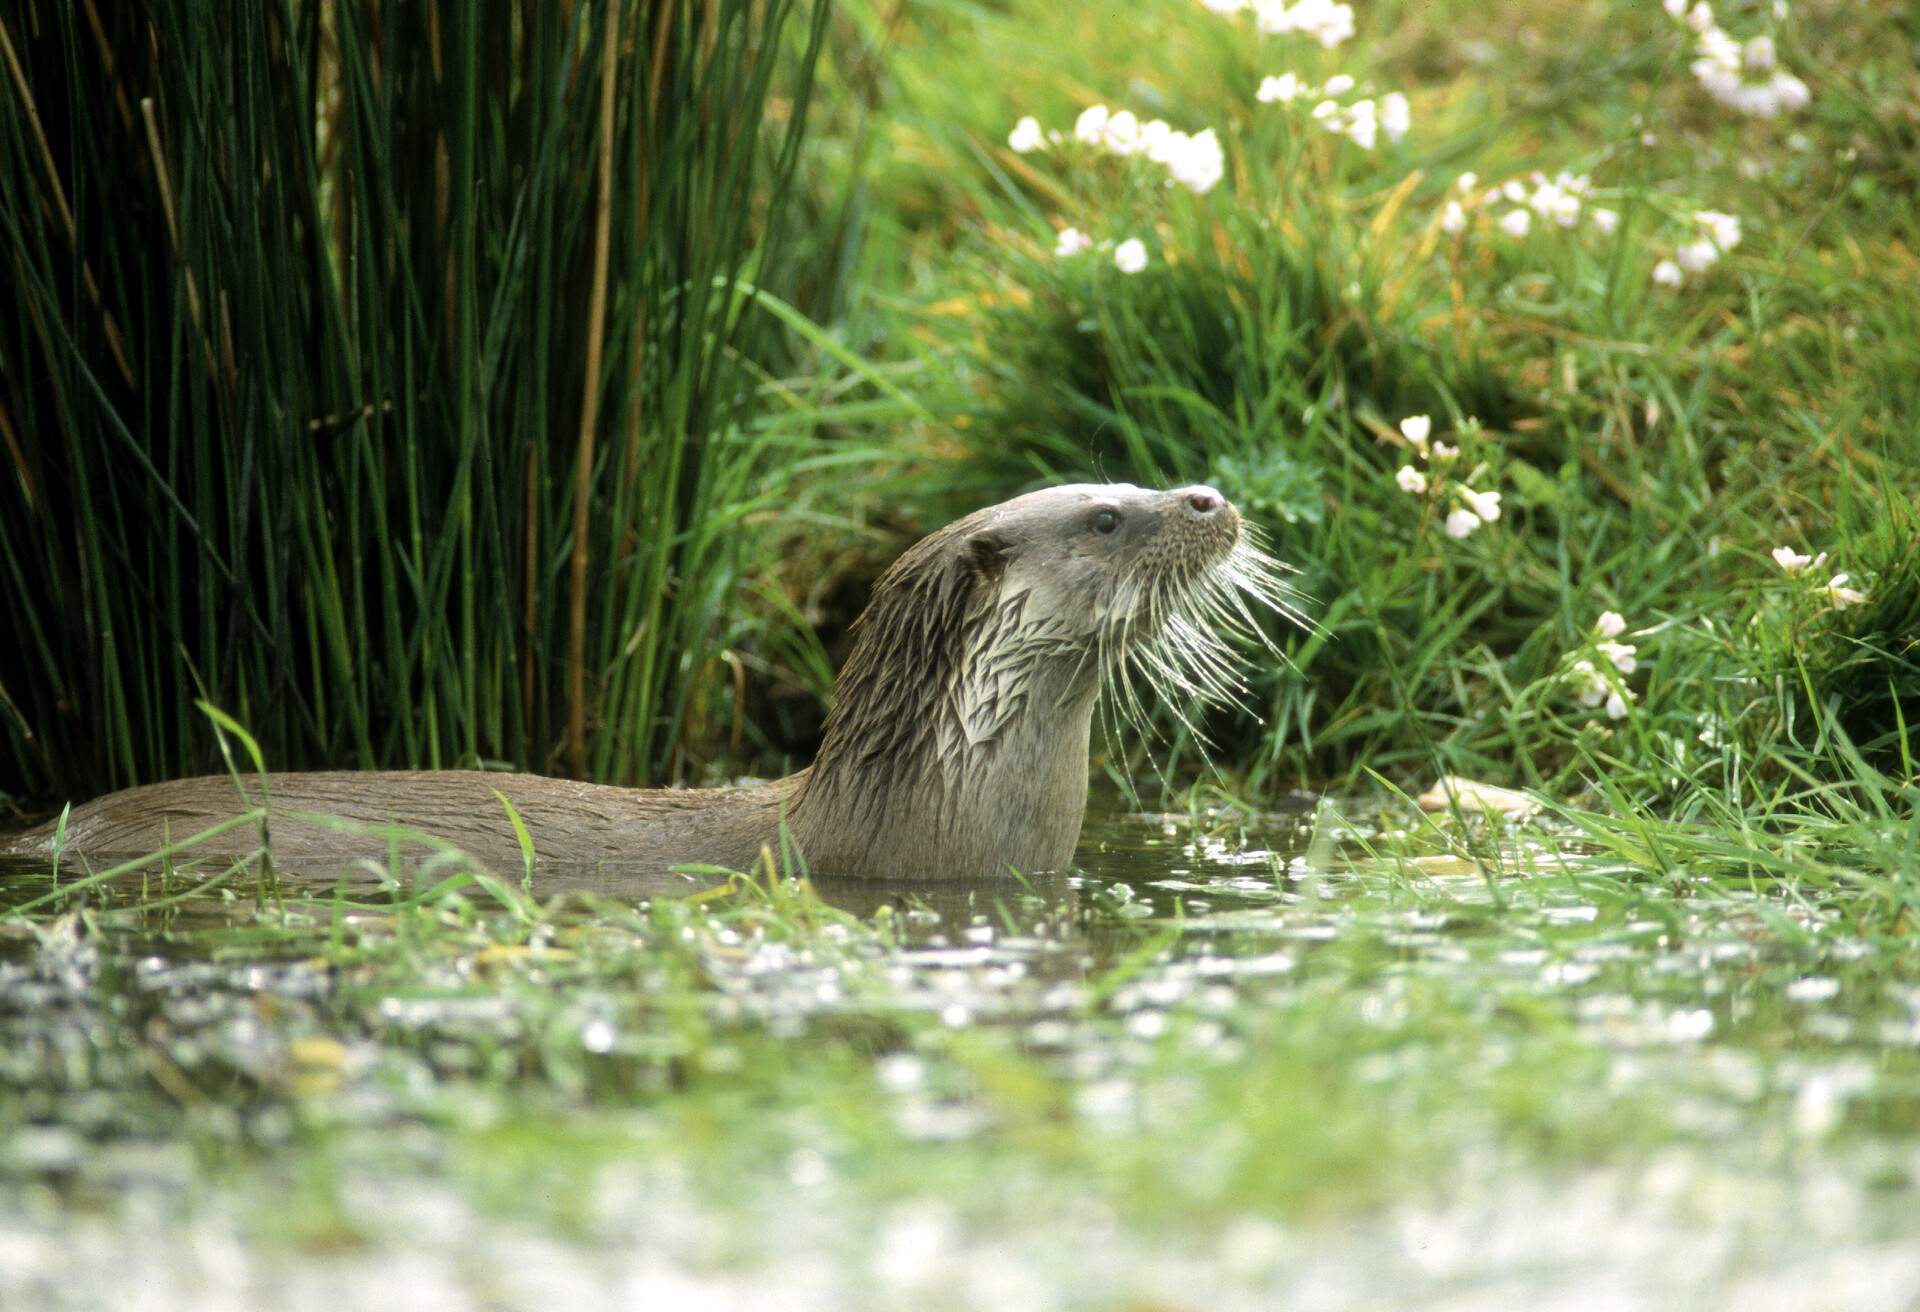 A lone otter submerged in waters surrounded by grass.